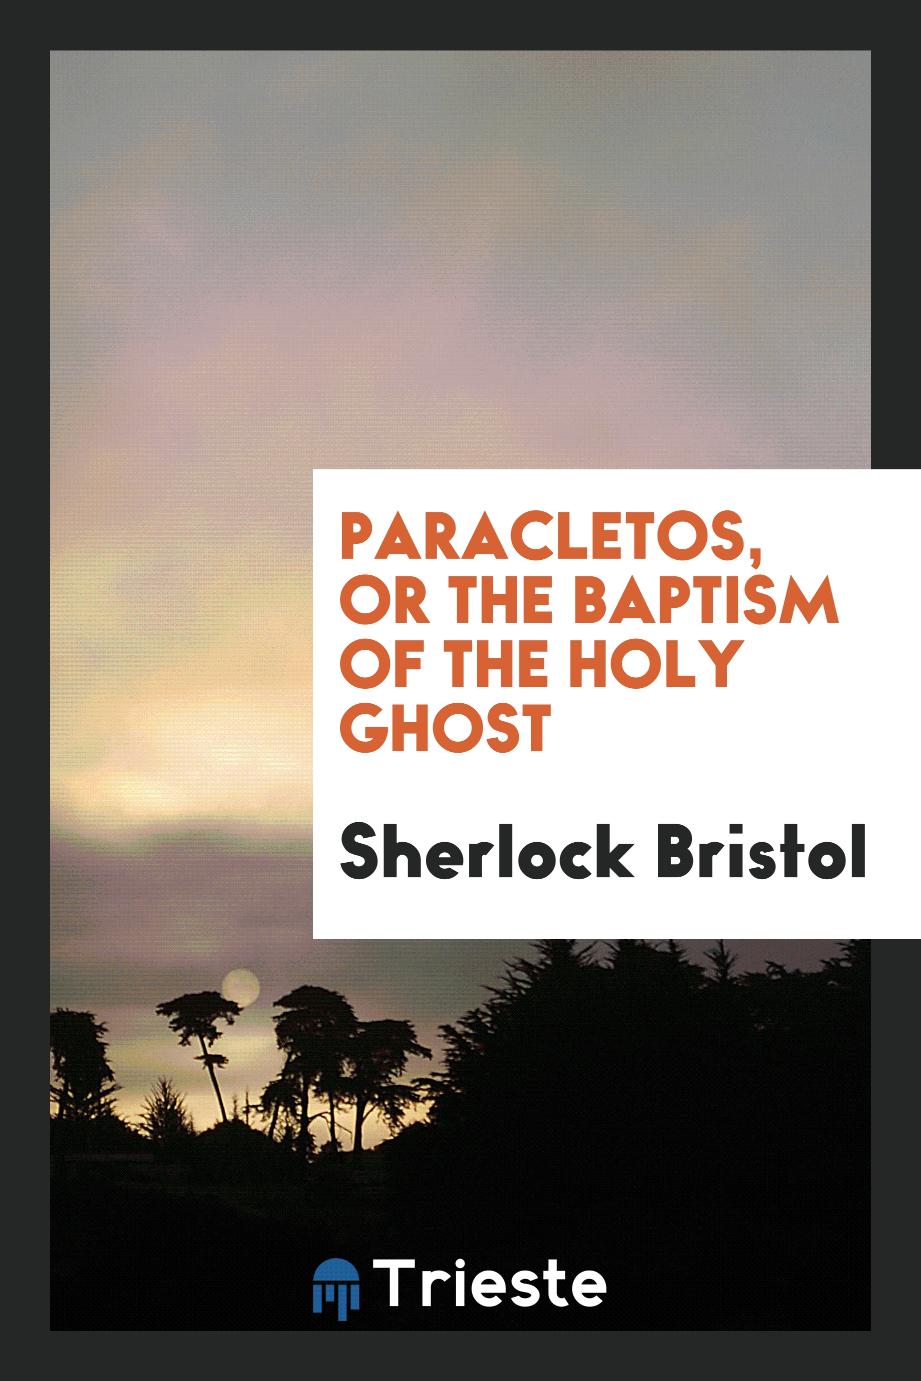 Paracletos, or the Baptism of the Holy Ghost